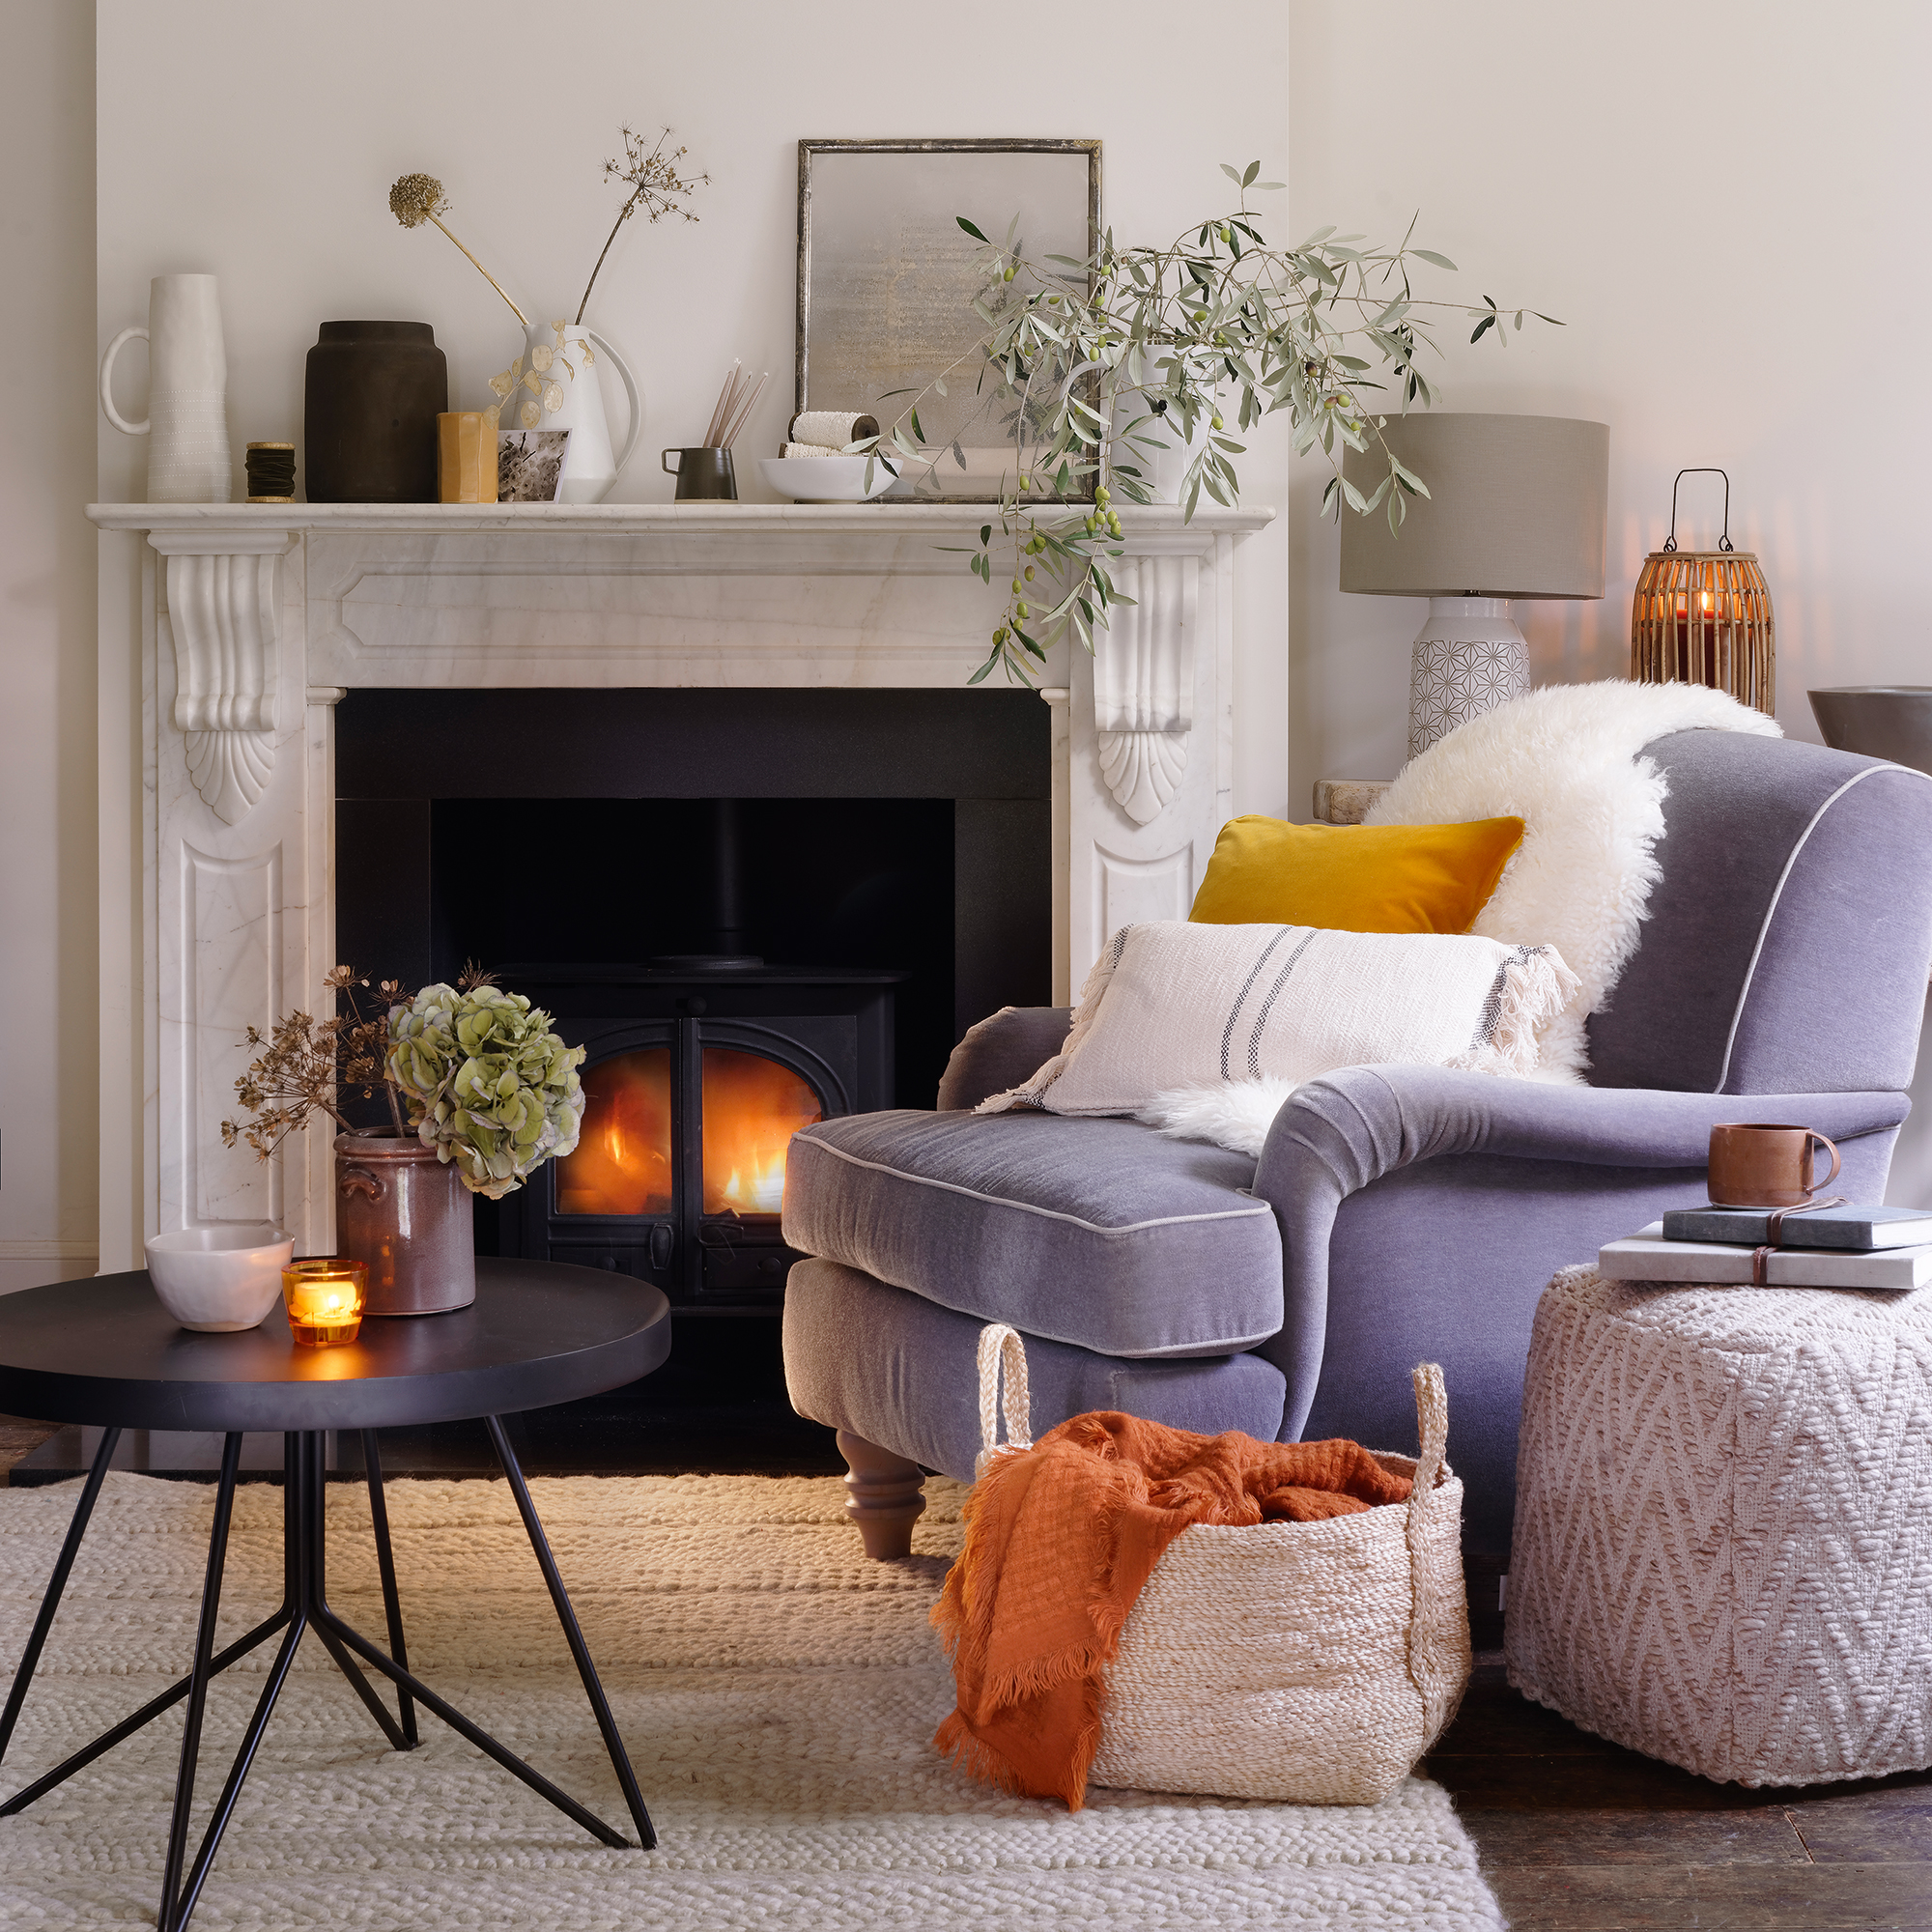 42 Foolproof Ways to Make Your Living Room Extra Cozy